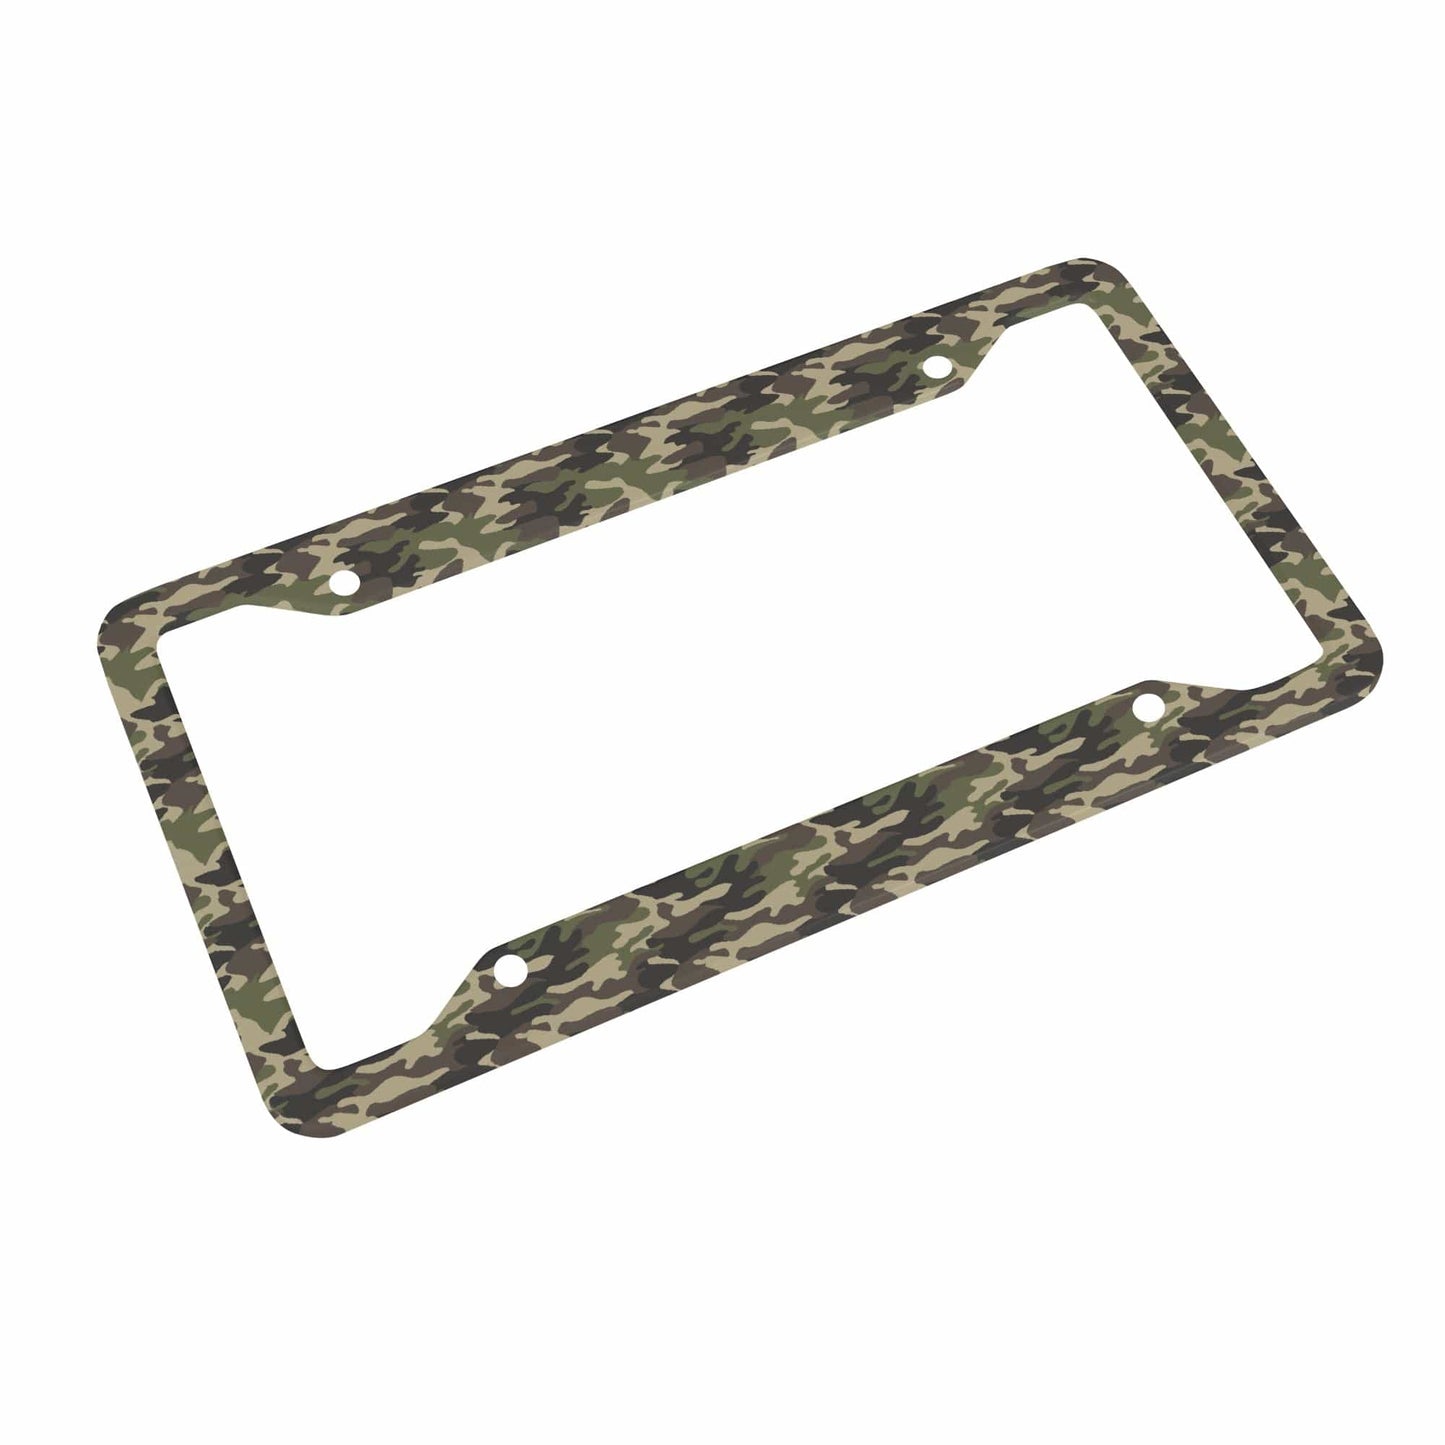 Camouflage License Plate Frame